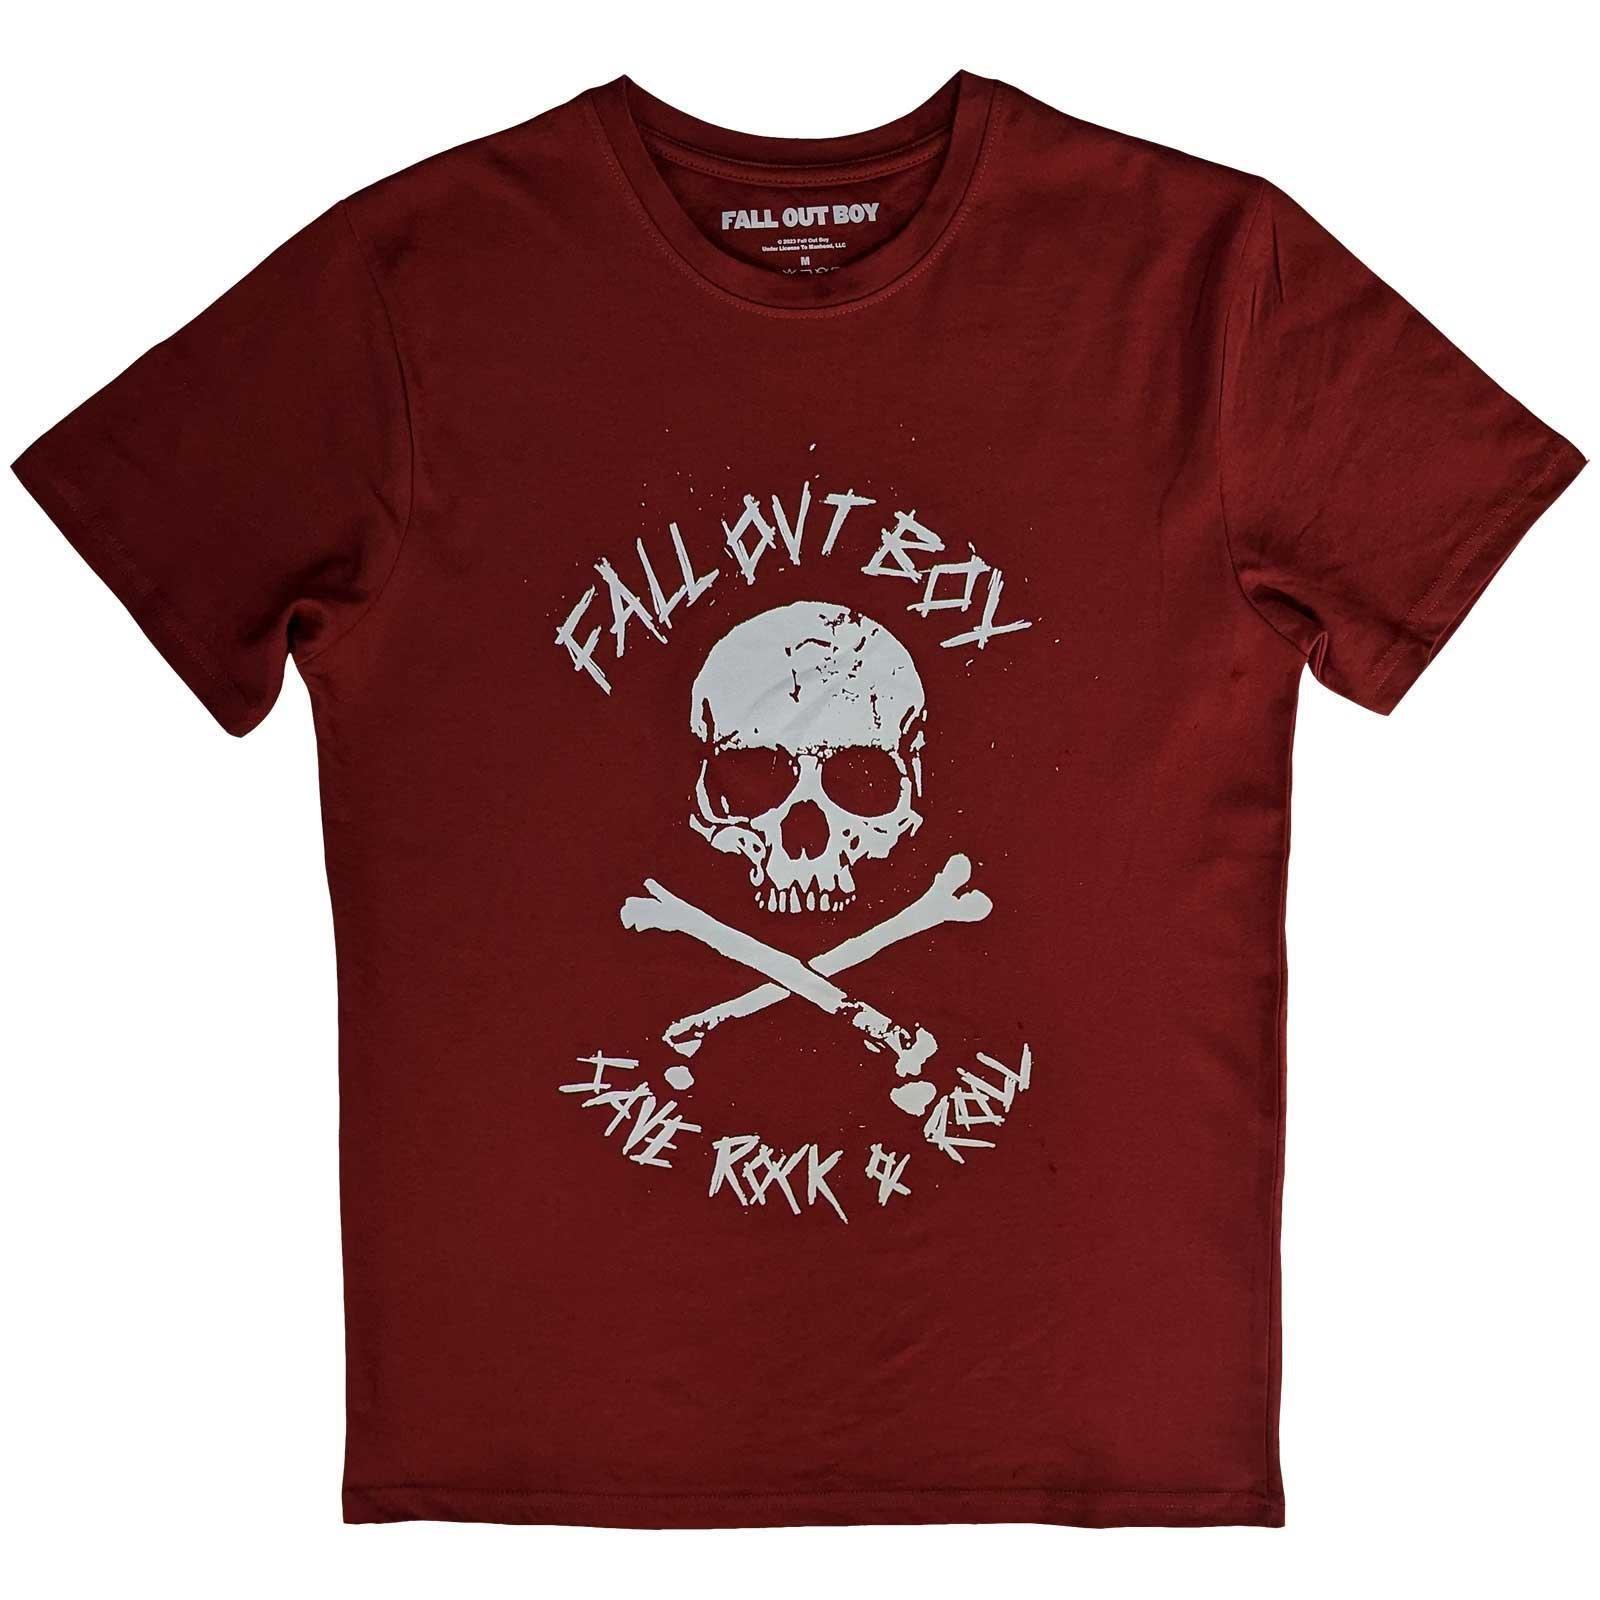 Save Rock And Roll Tshirt Damen Rot Bunt M von Fall Out Boy